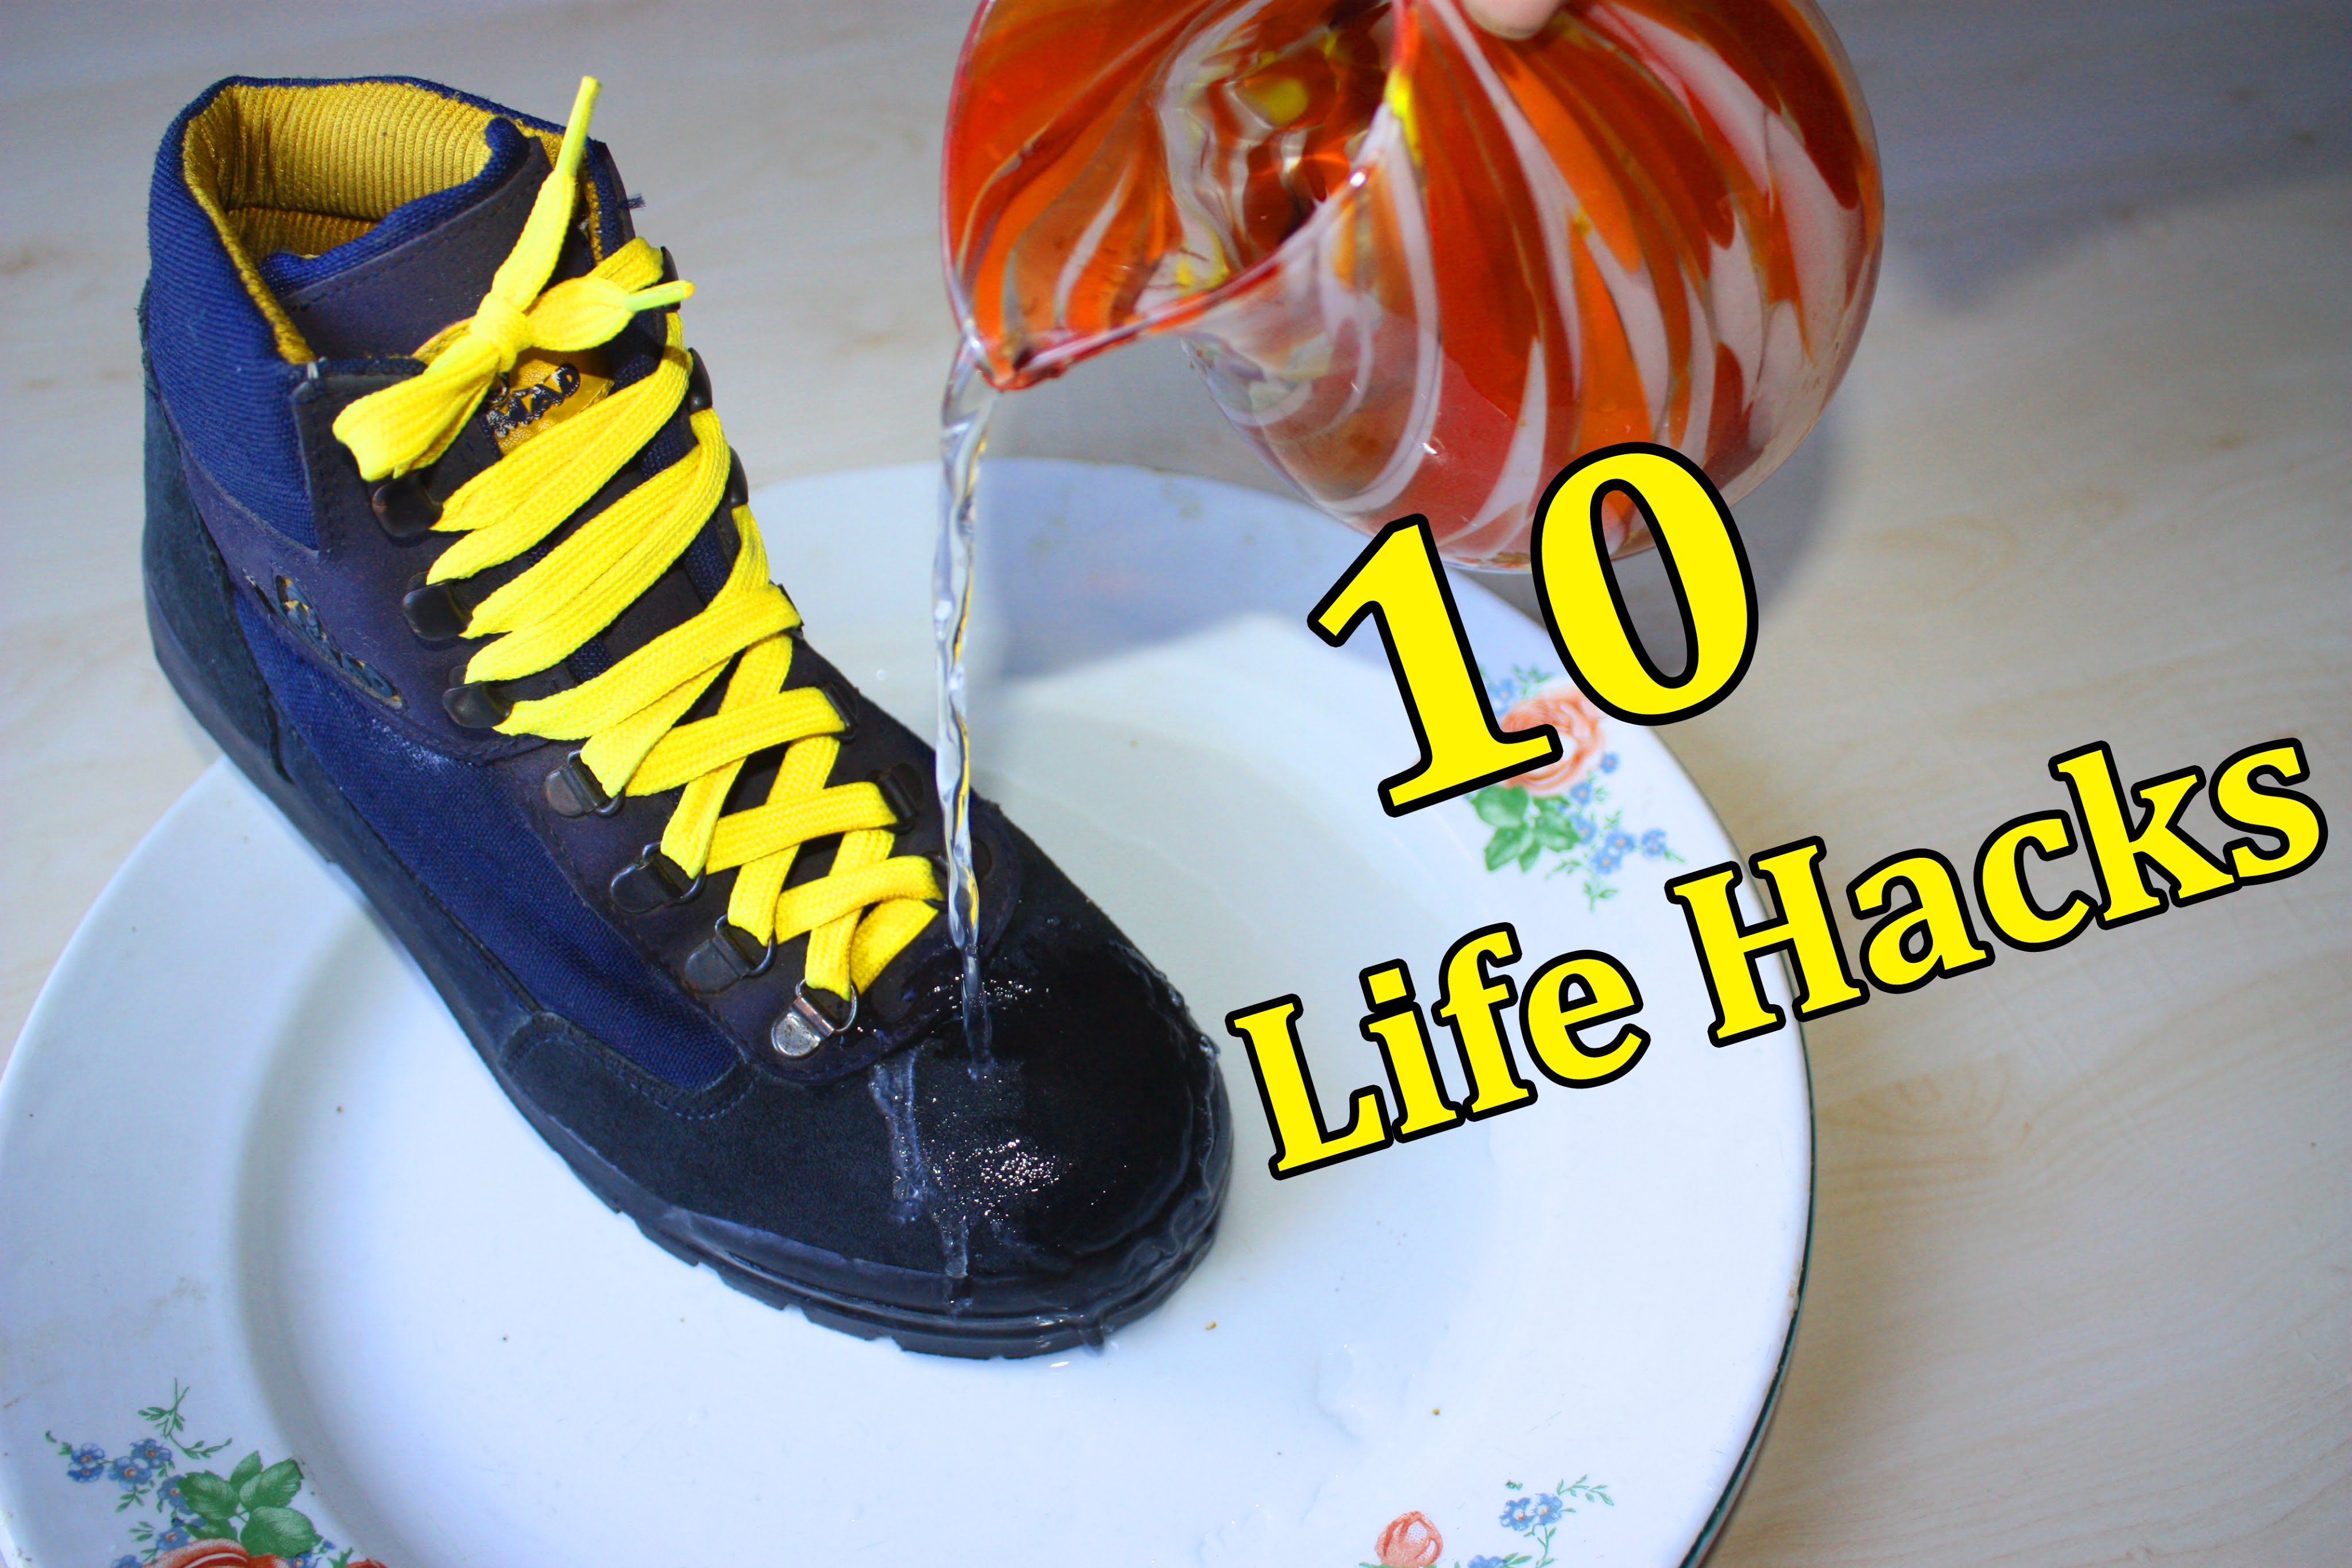 10 LIFE HACKS that will change your life | MrGear